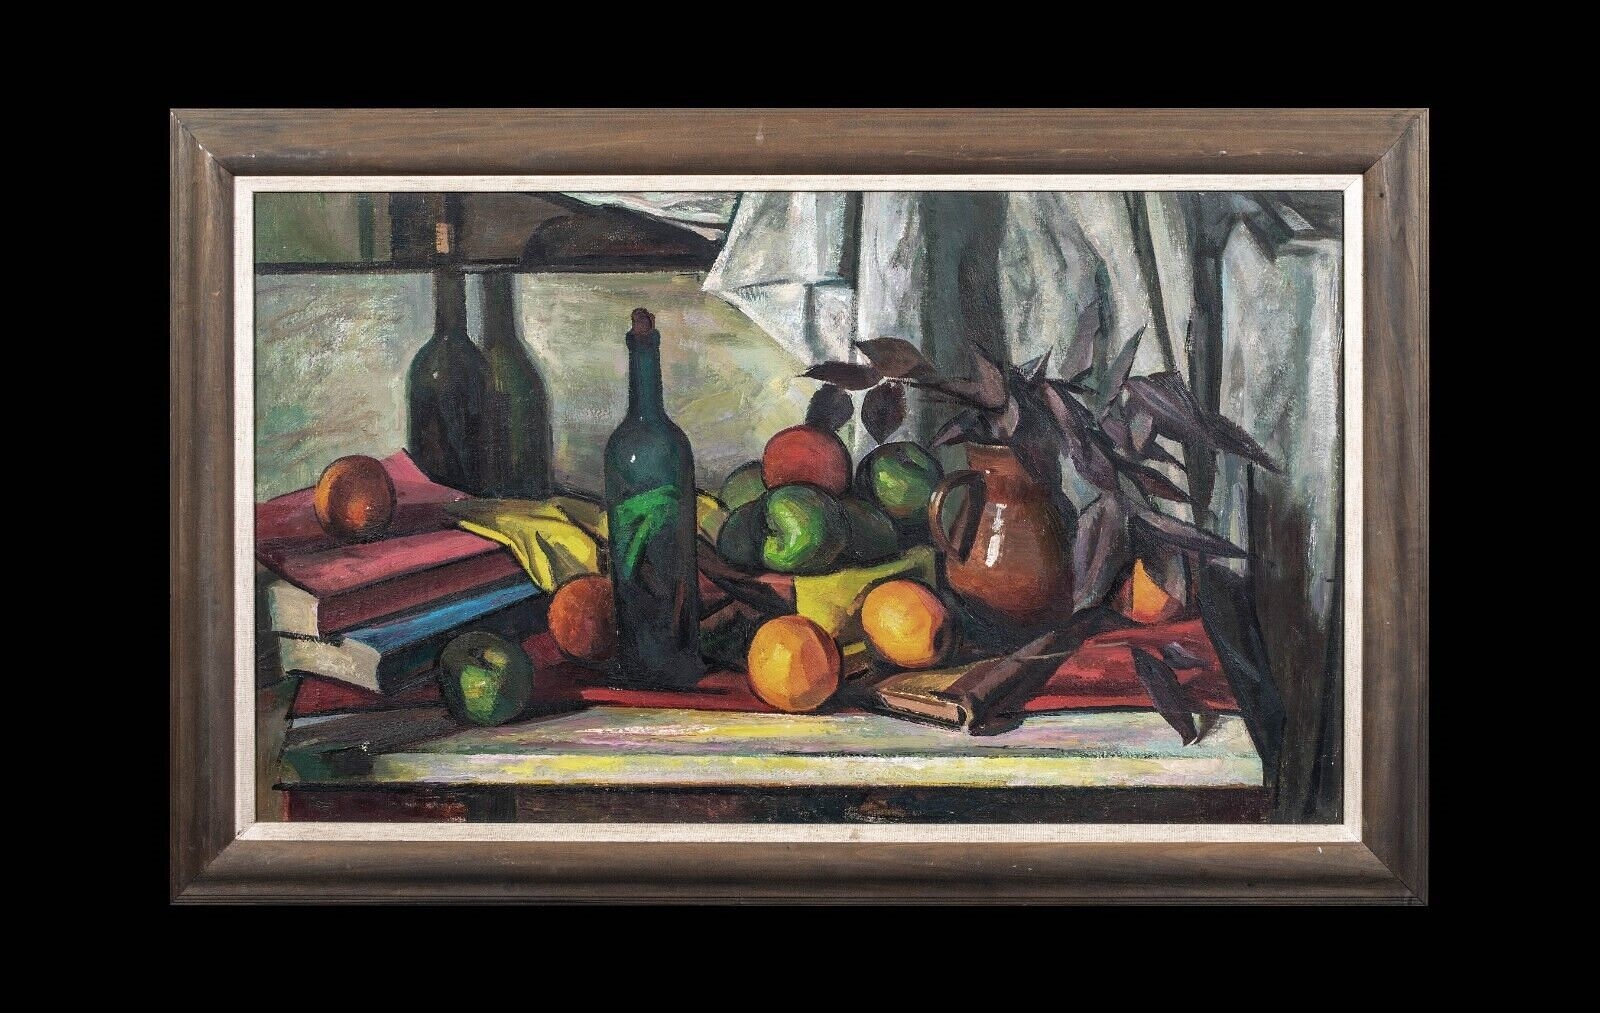 Artwork by Paul Cézanne, STILL LIFE OF BOOKS, BOTTLES AND FRUITS OIL PAINTING, Made of painted in oil on artists' board